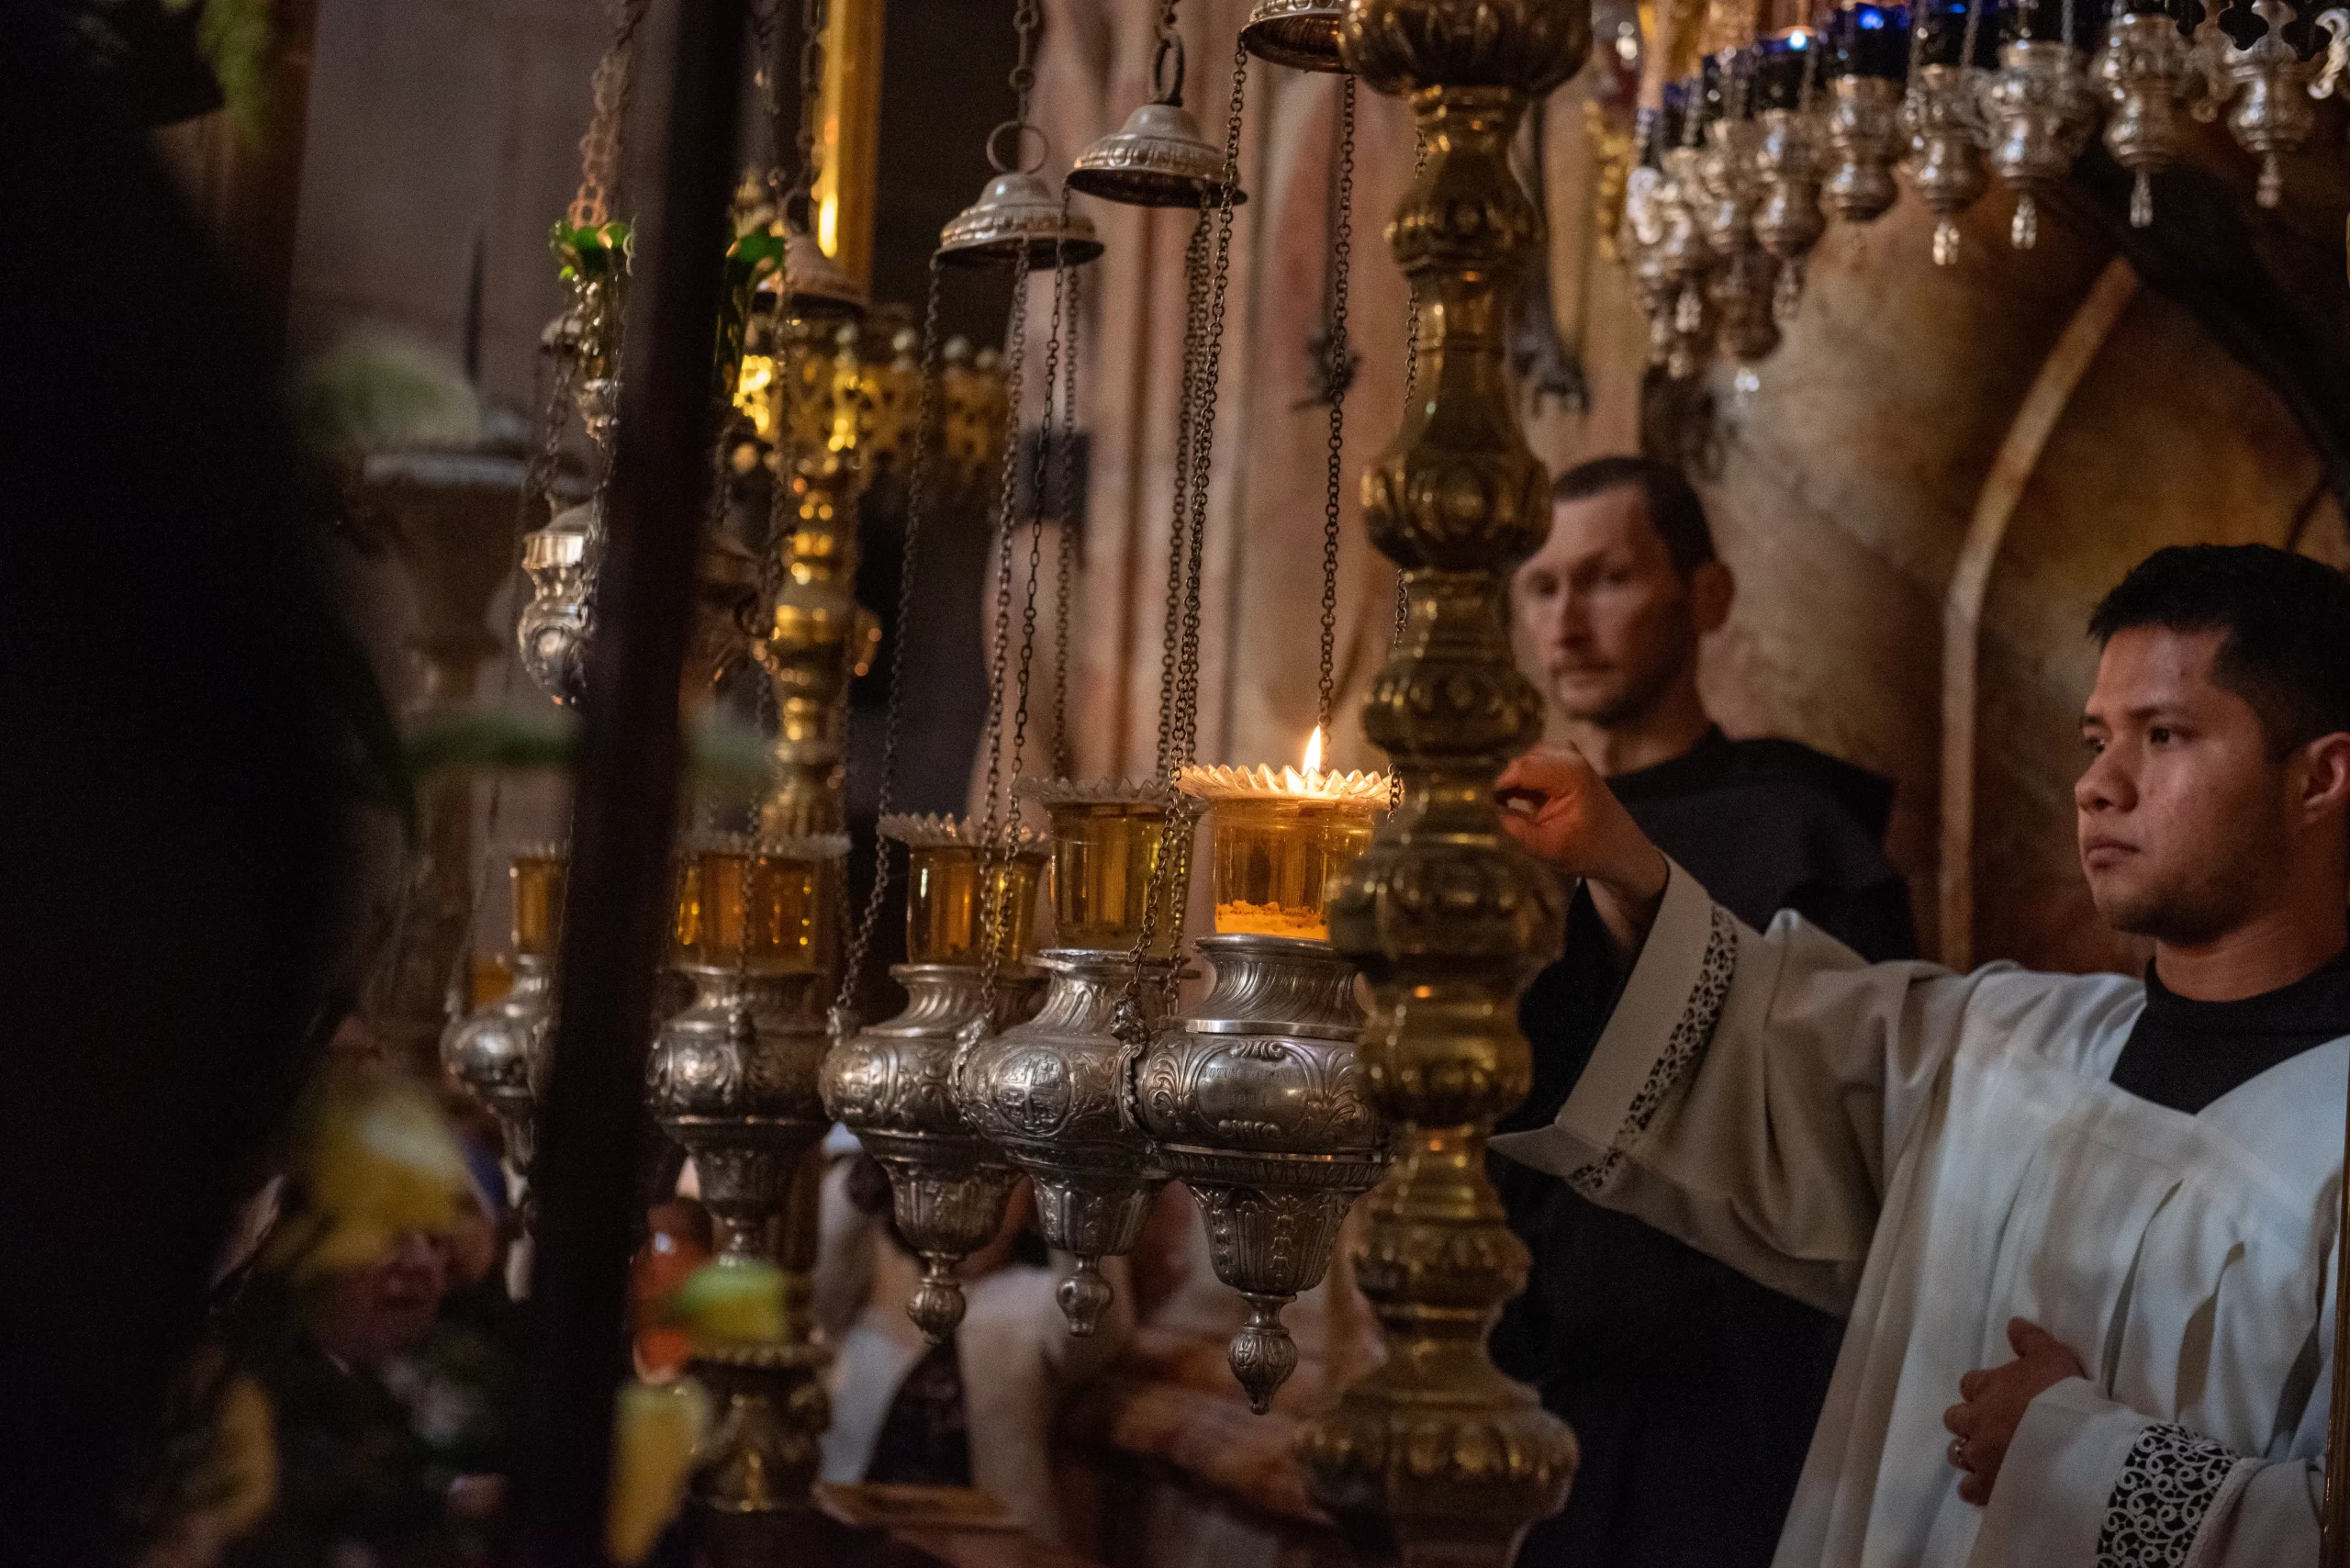 One of the masters of ceremonies lights the lamps in front of the edicule of the Holy Sepulcher during the Easter Vigil, which was held on the morning of Saturday, March 30, 2024, in the Basilica of the Holy Sepulcher, in Jerusalem, in the very place were the Resurrection occurred. Credit: Marinella Bandini